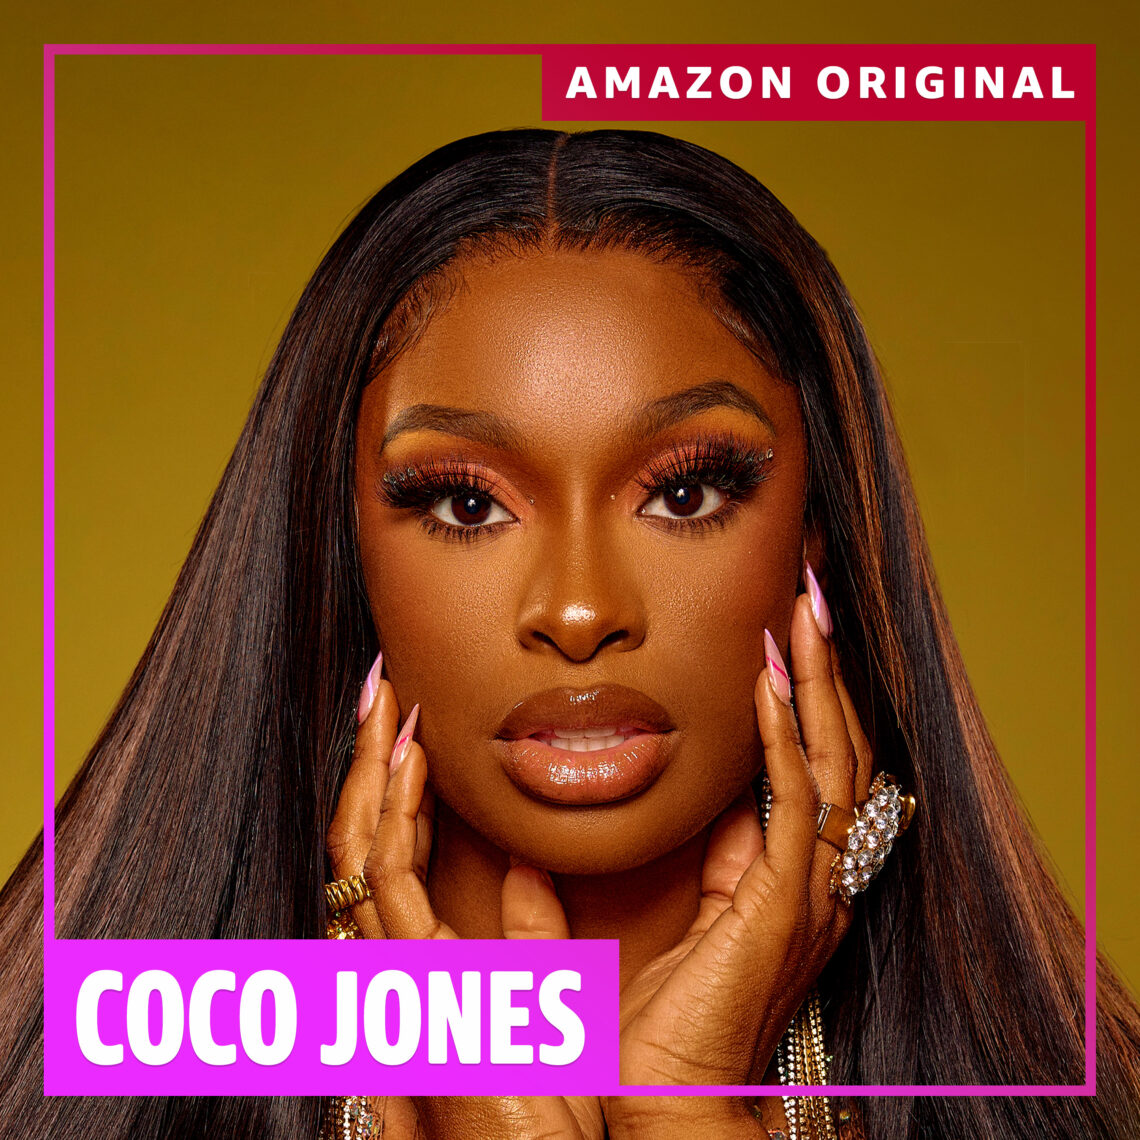 Coco Jones Shares New Song 'Love Is War' Rated R&B